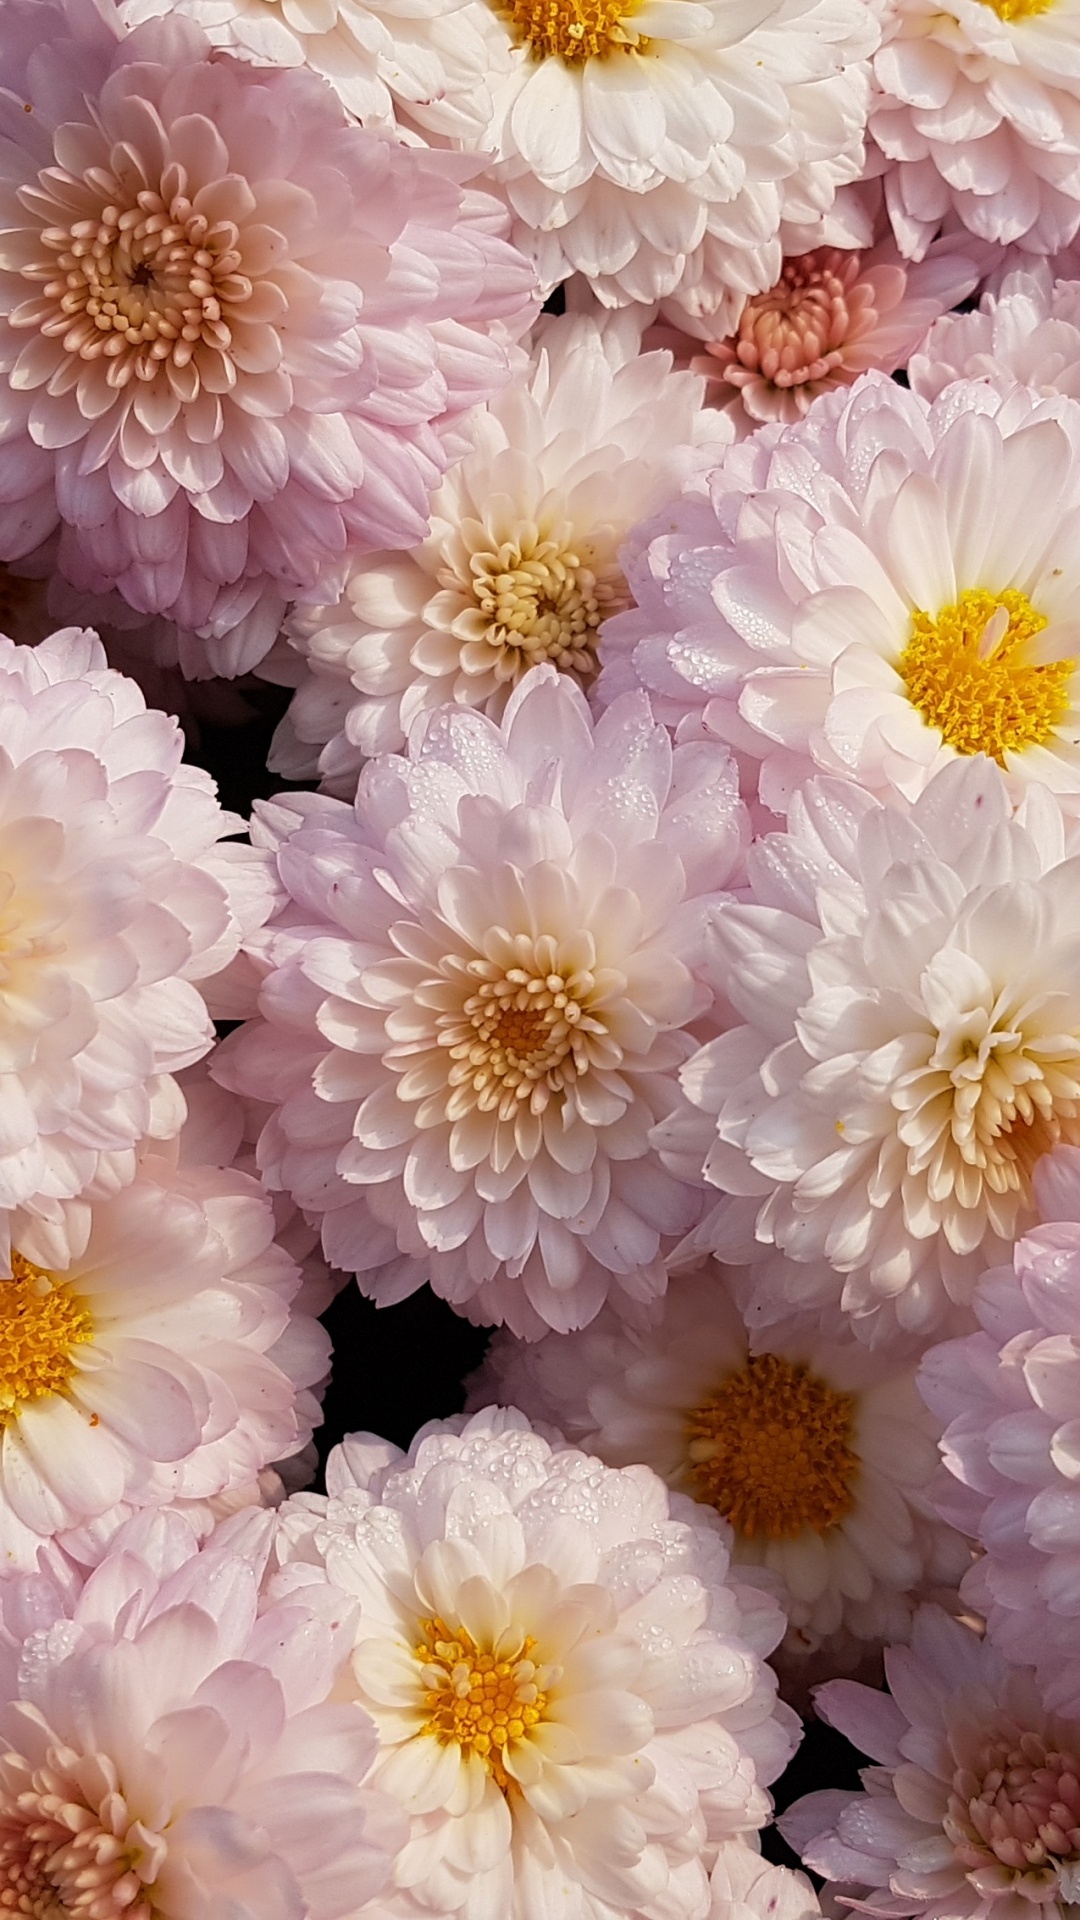 White and Purple Flowers in Close up Photography. Wallpaper in 1080x1920 Resolution